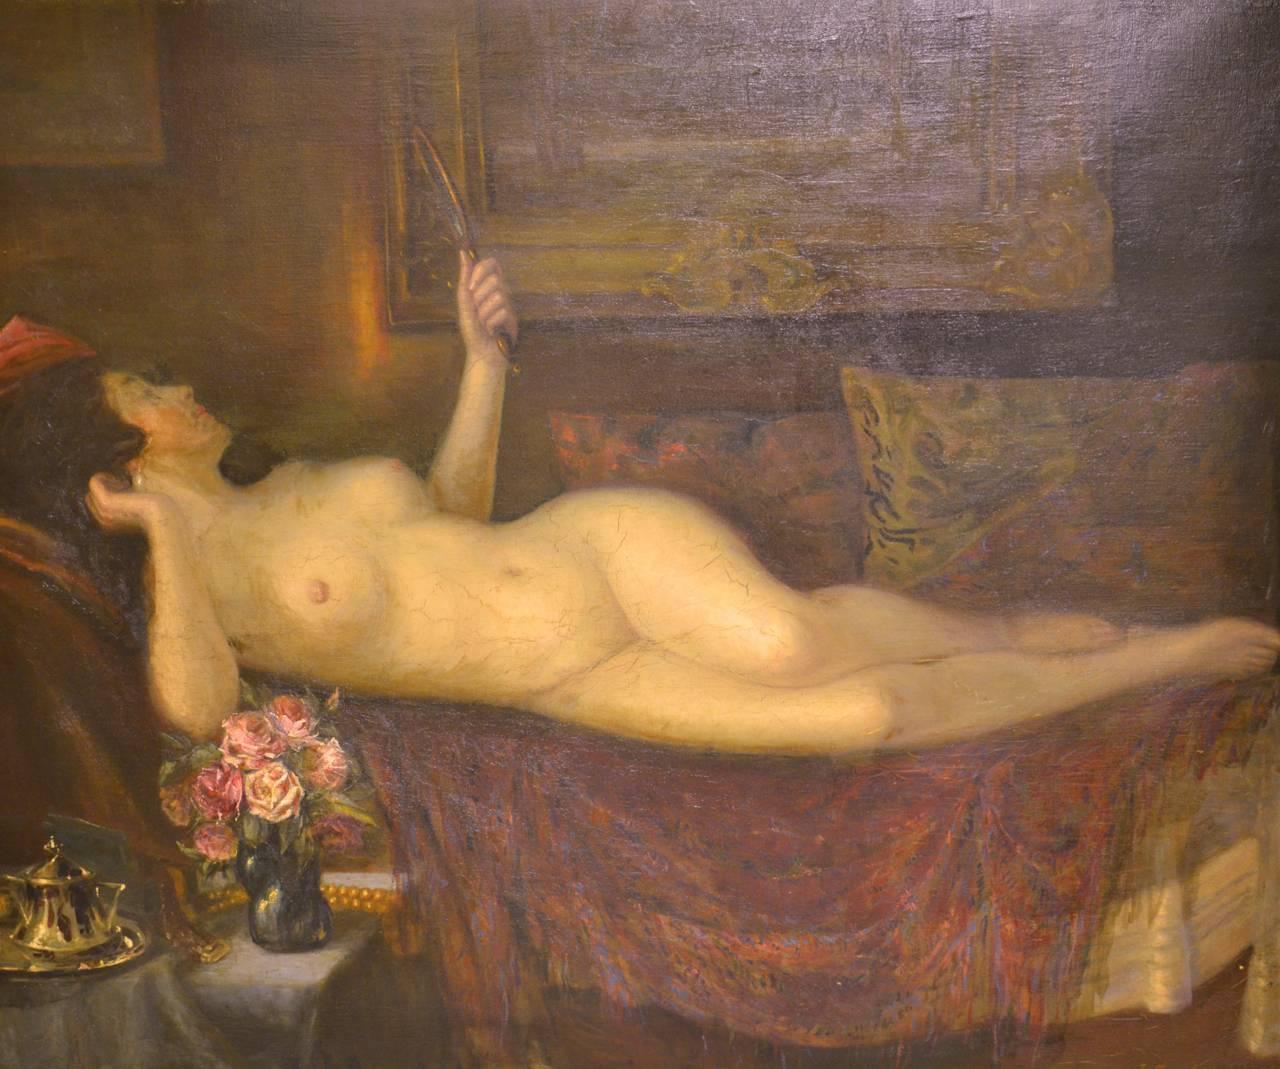 Jan Wysocki Nude Painting - Reclining Nude Woman w Mirror & Roses LARGE Oil Painting 19th cent POLISH ARTIST